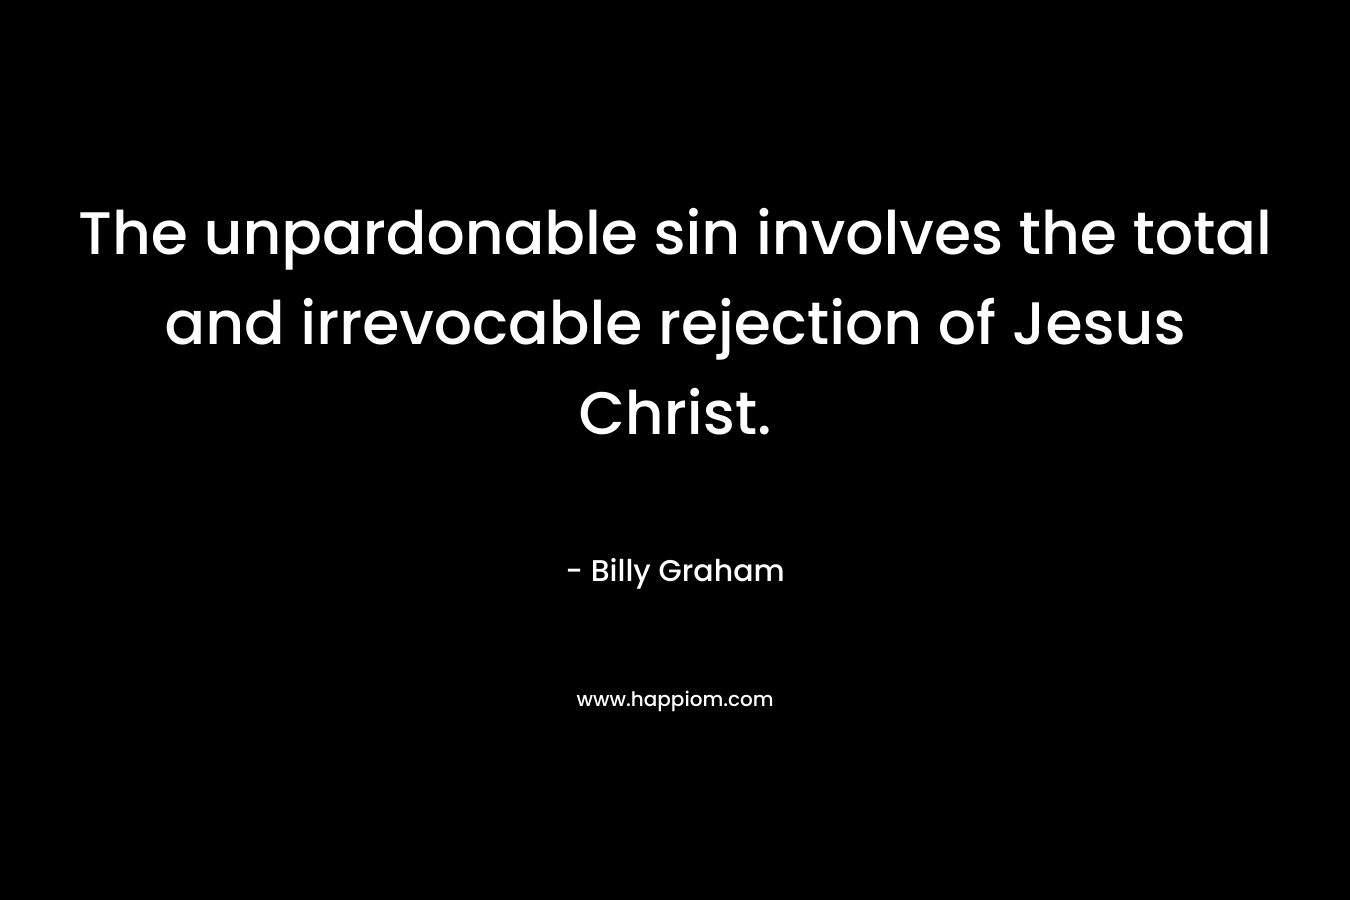 The unpardonable sin involves the total and irrevocable rejection of Jesus Christ.